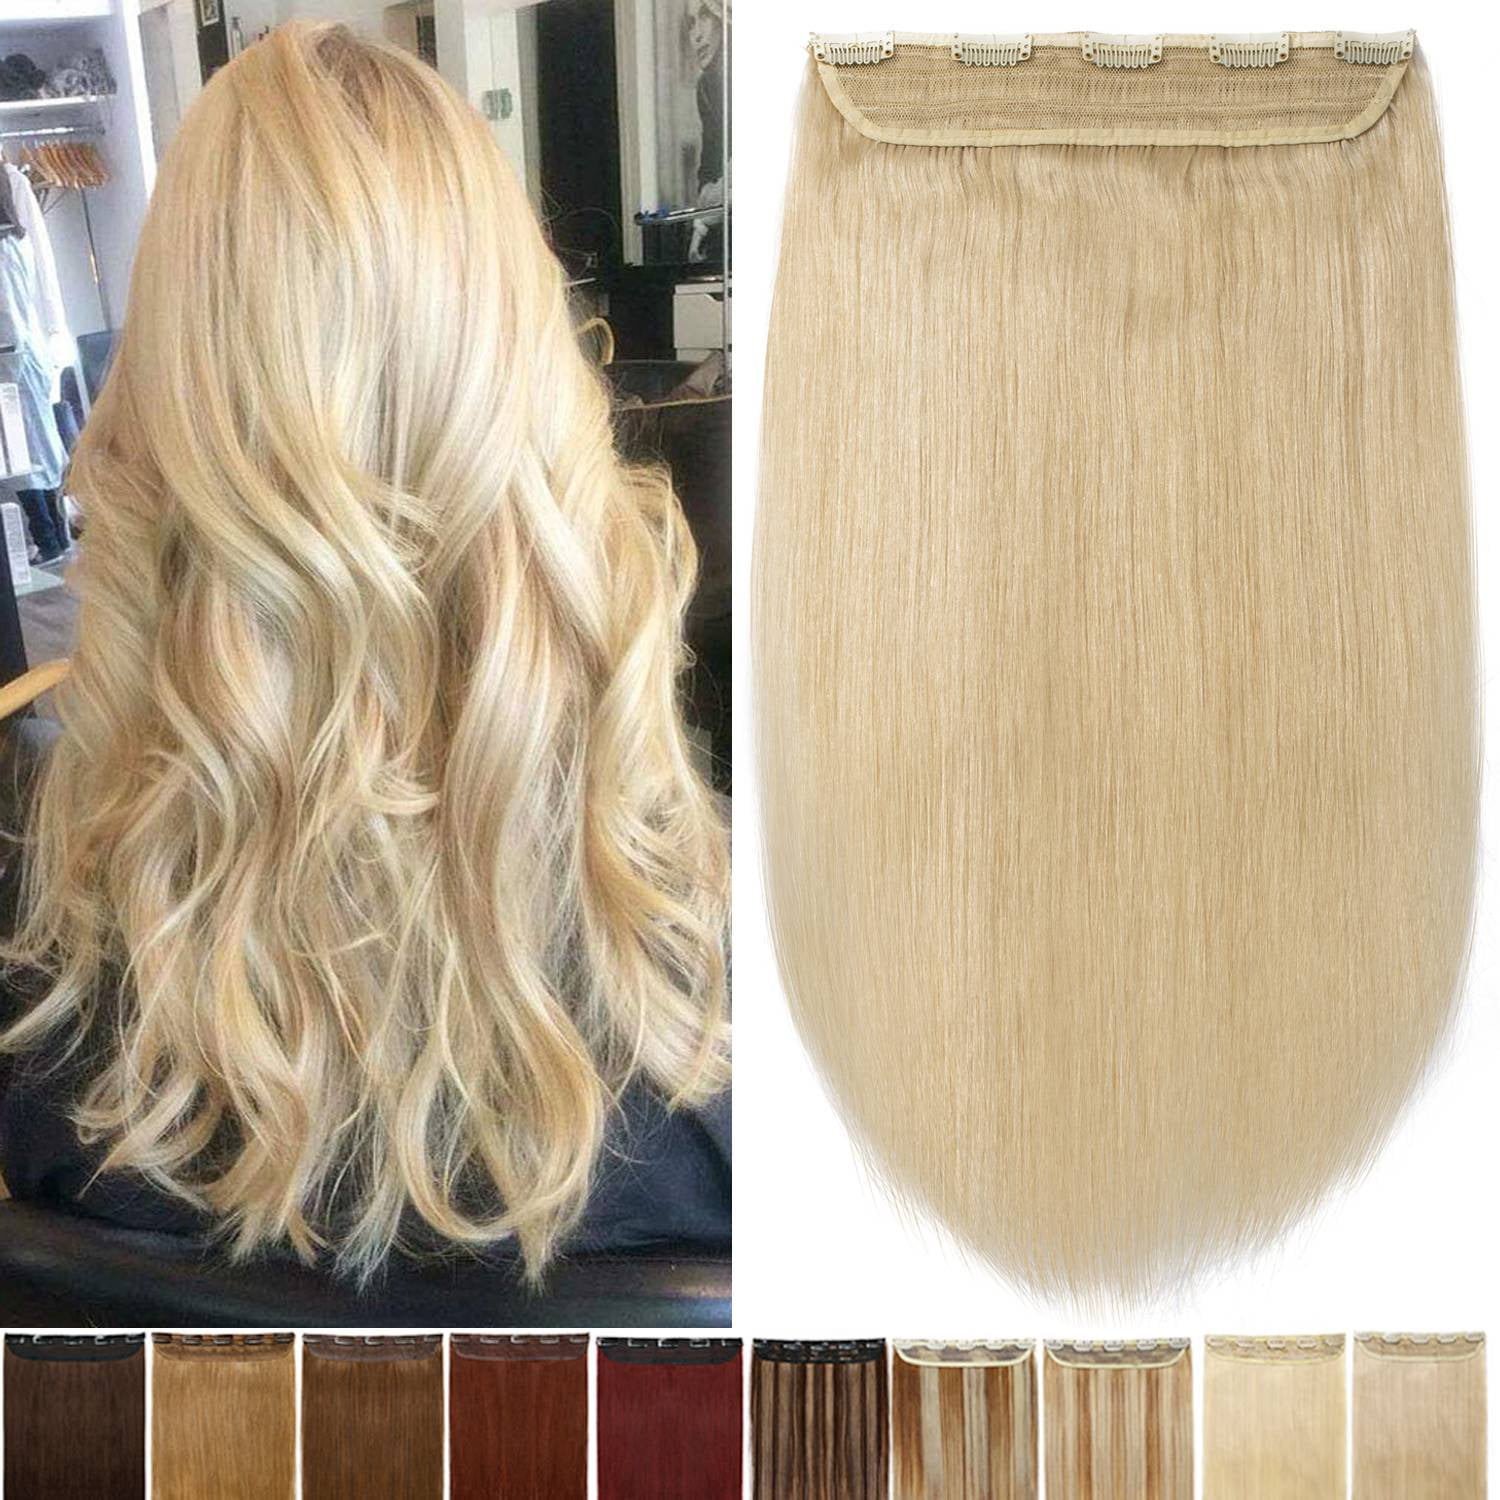 Tape in Hair Extension Human Hair Platinum Blonde #60 16’’Long Straight 100% US